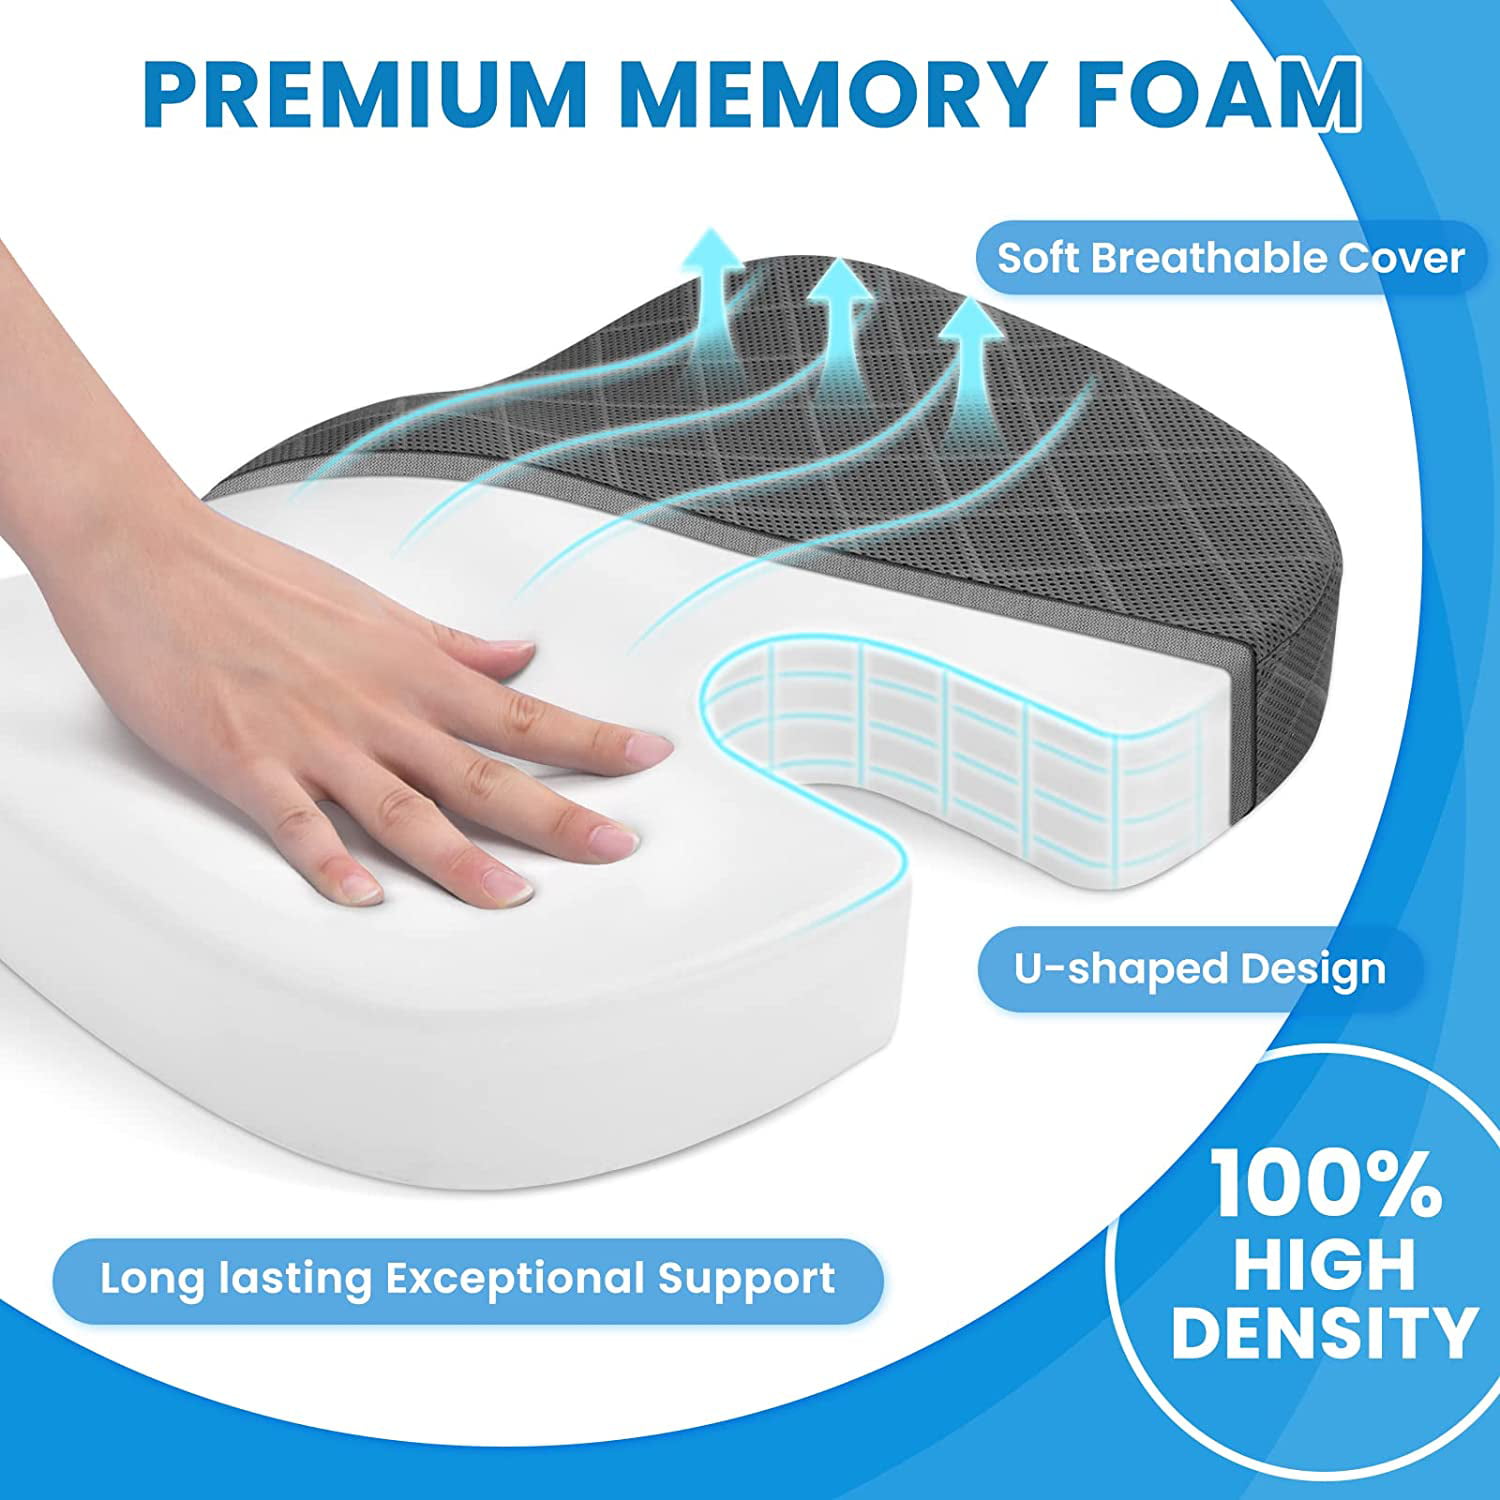 Memory Foam Car Seat Cushion,Driver Seat Cushion Coccyx Sciatica Pillow  Sitting Butt Cushions for Pressure Relief for Car Seat Driver,Computer Chair,Office,Wheelchair.  Price: $33. USA testers Dm me for details. : r/AMZreviewTrader